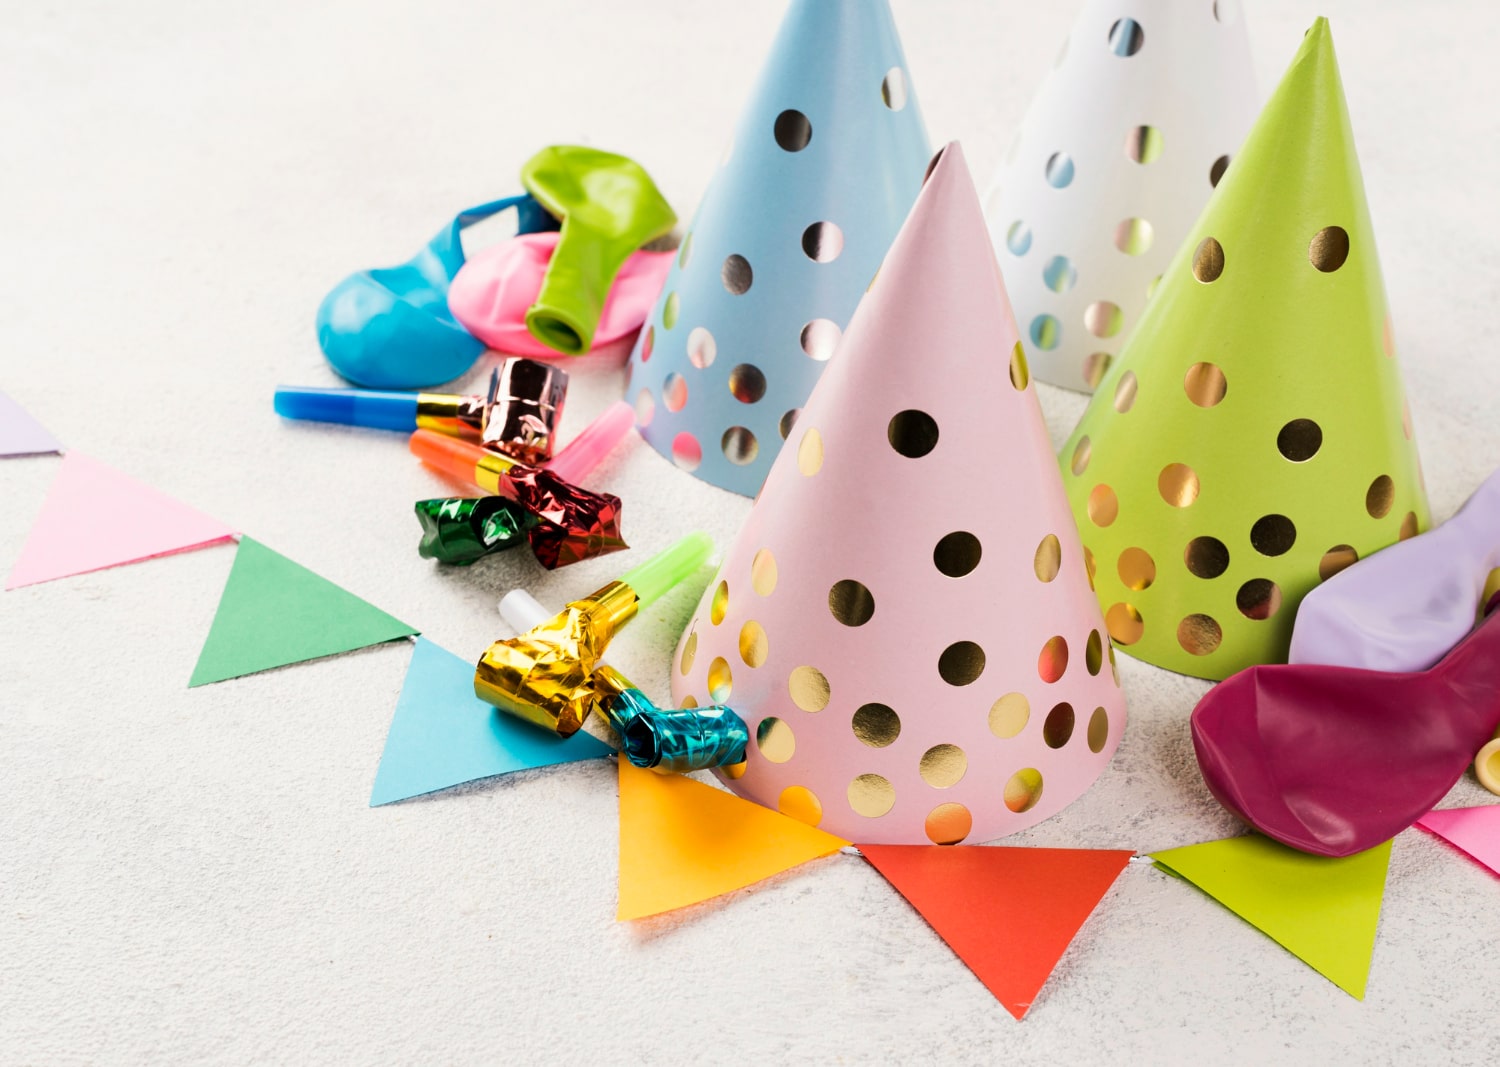 DIY Party Hat Station: Fun-filled home birthday decor